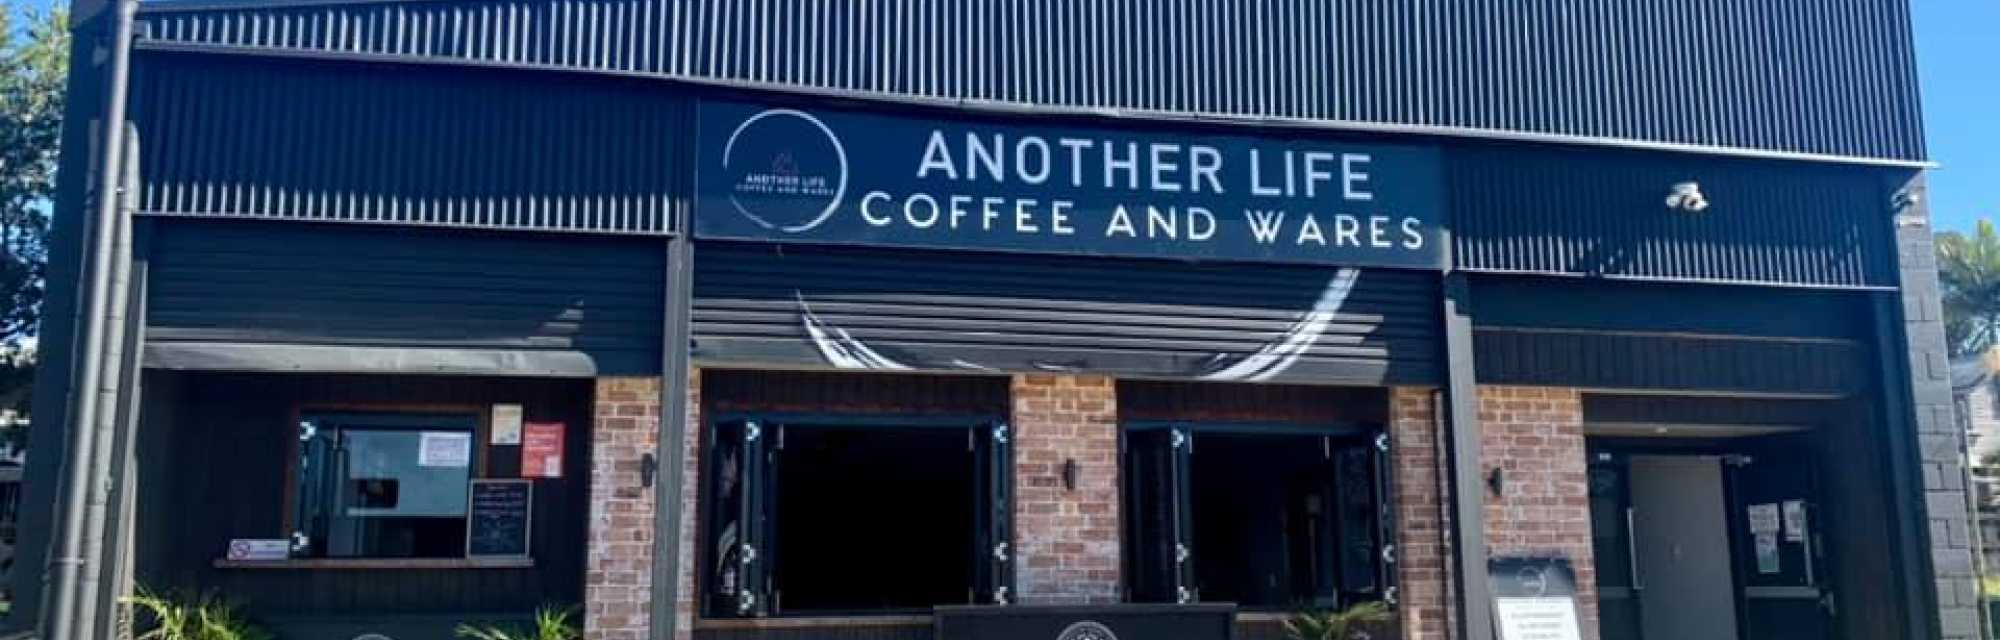 Another life coffee and wares